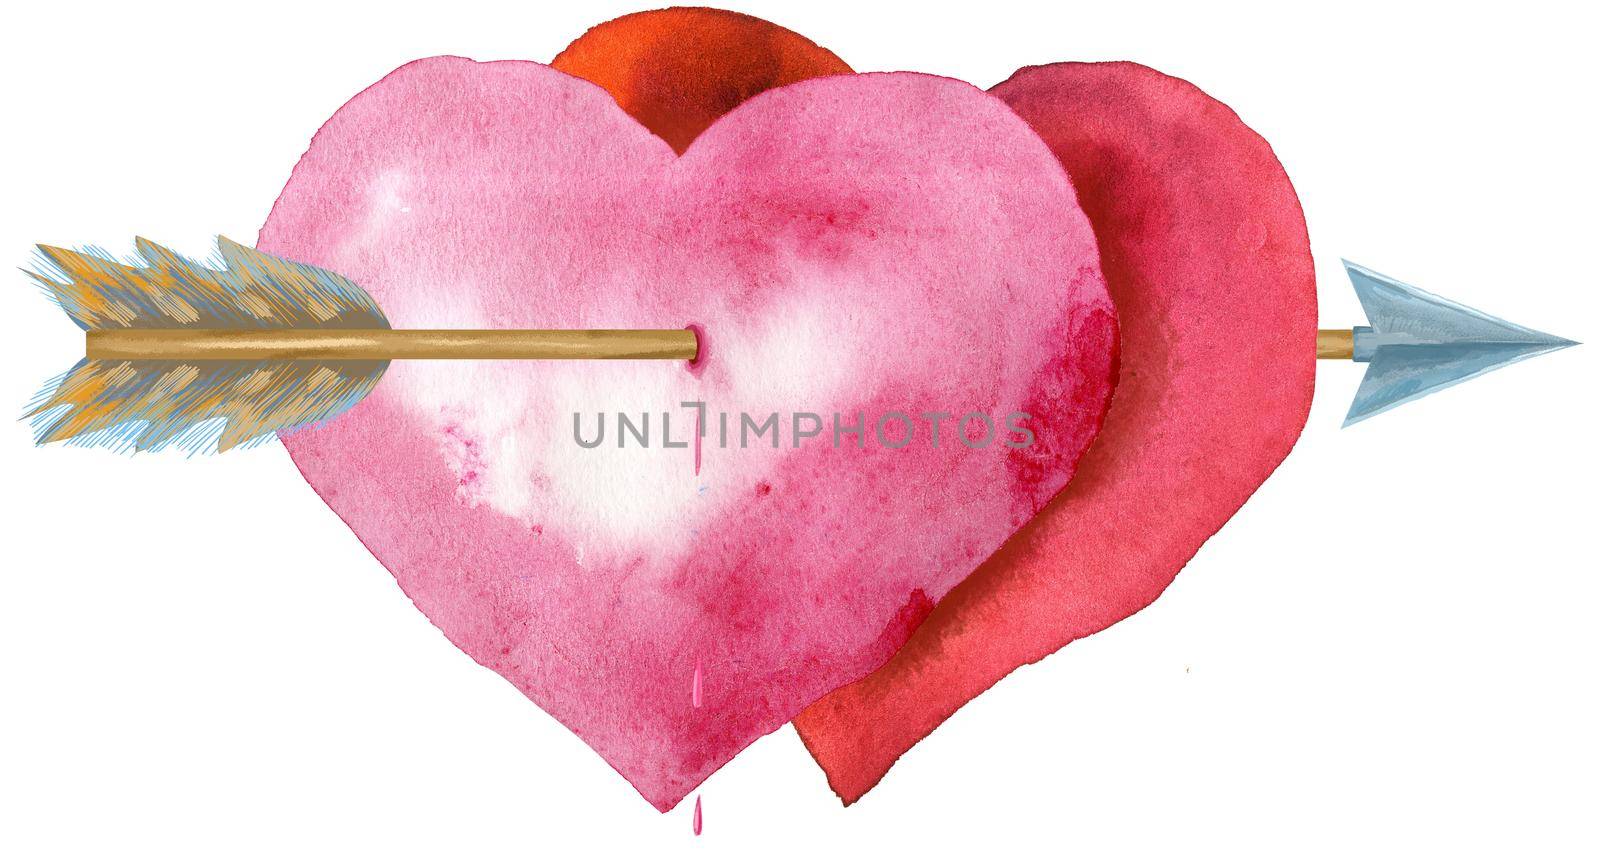 Beautiful valentines card of two hearts linked by an arrow. Watercolor illustration.